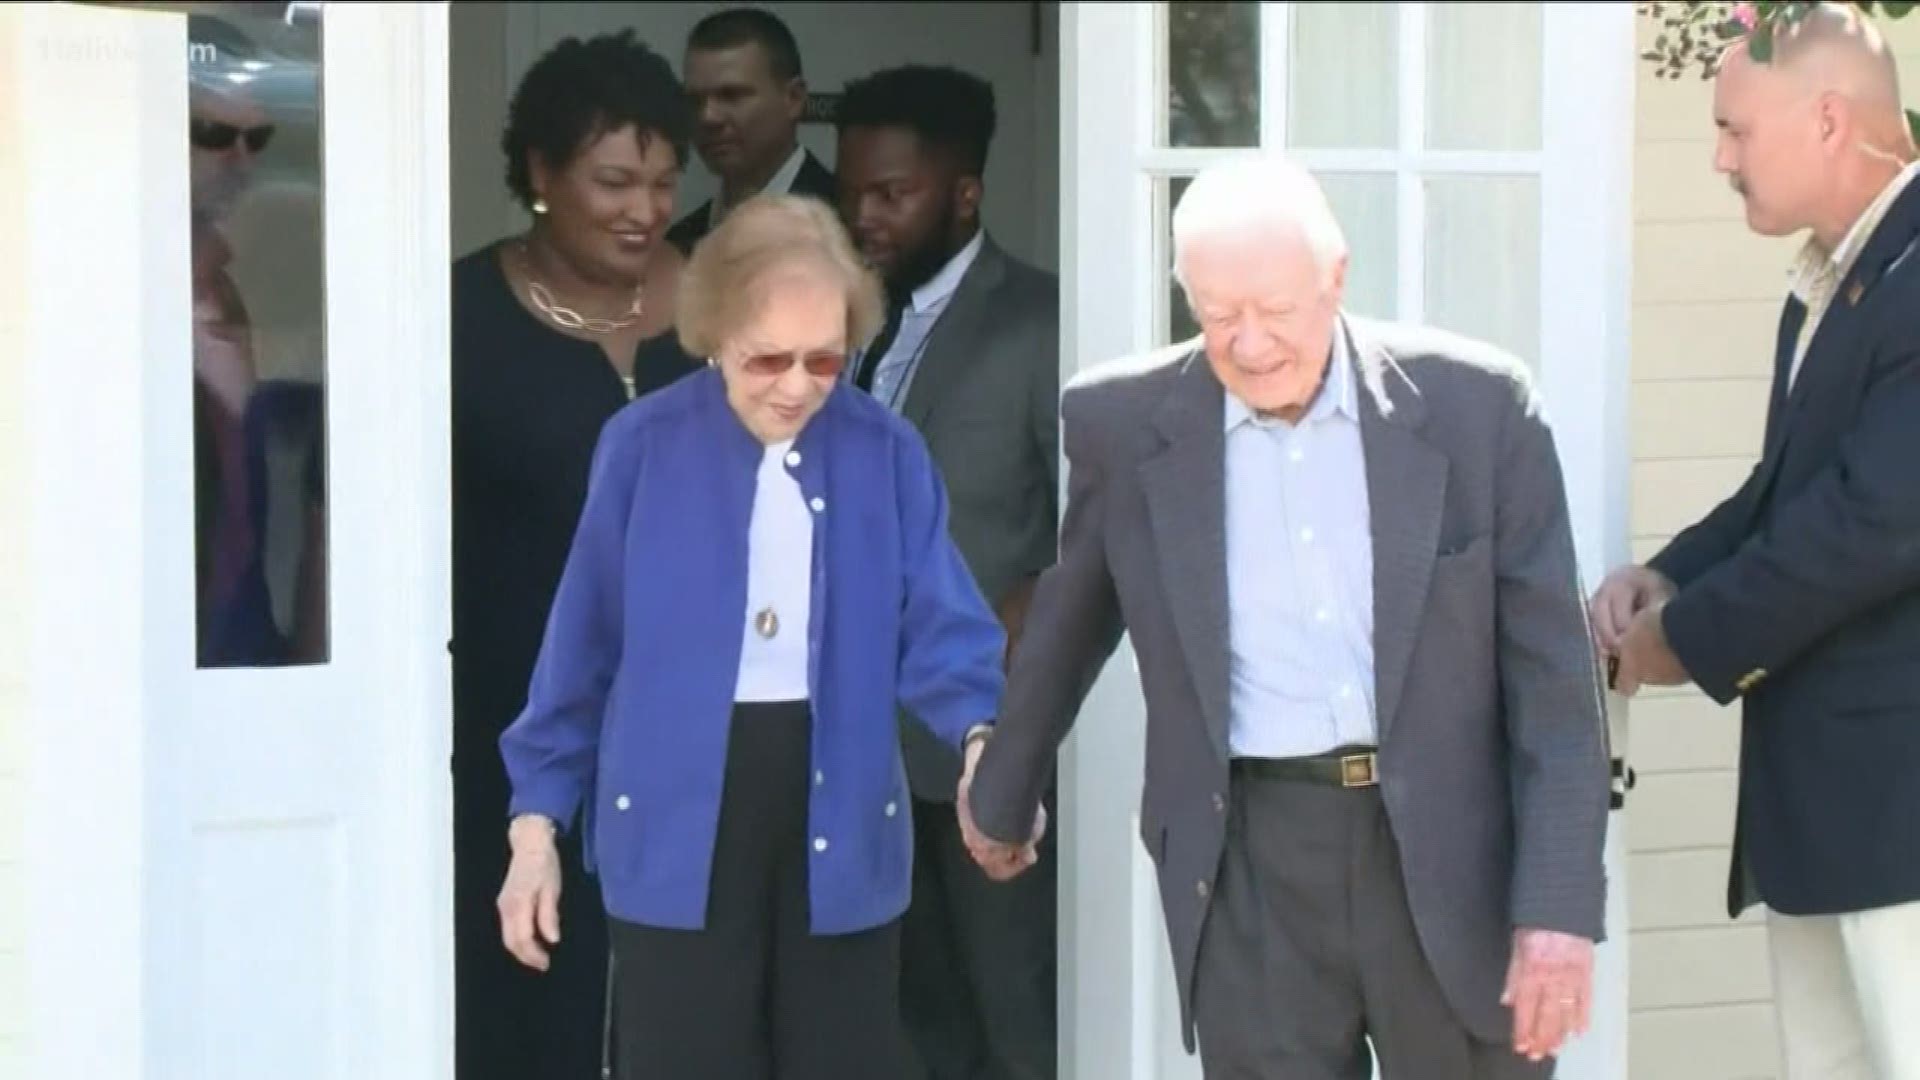 The former President was released from Phoebe Sumter Medical Center in Americus, Ga. Thursday morning where he underwent surgery after the fall on May 13.